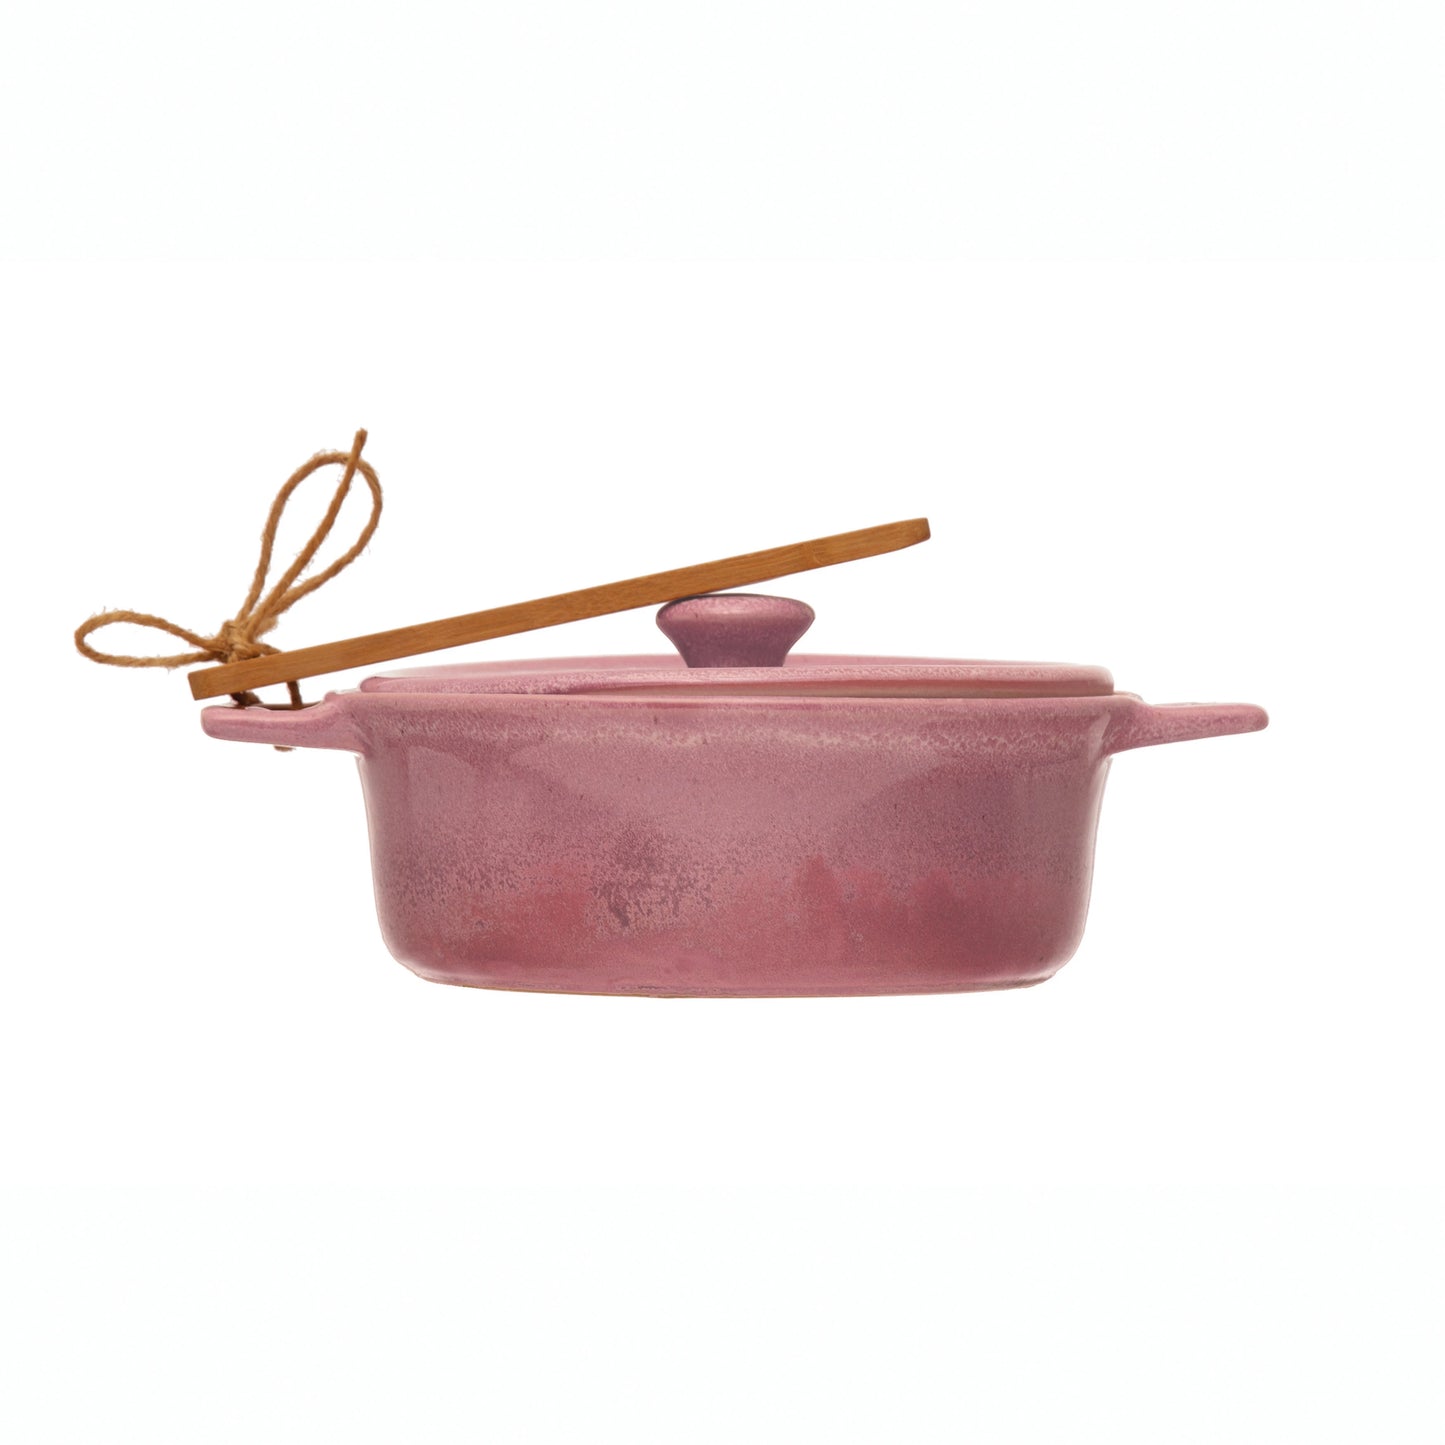 side view of a pink brie baker with wooden spreader tied to the handle on a white background.